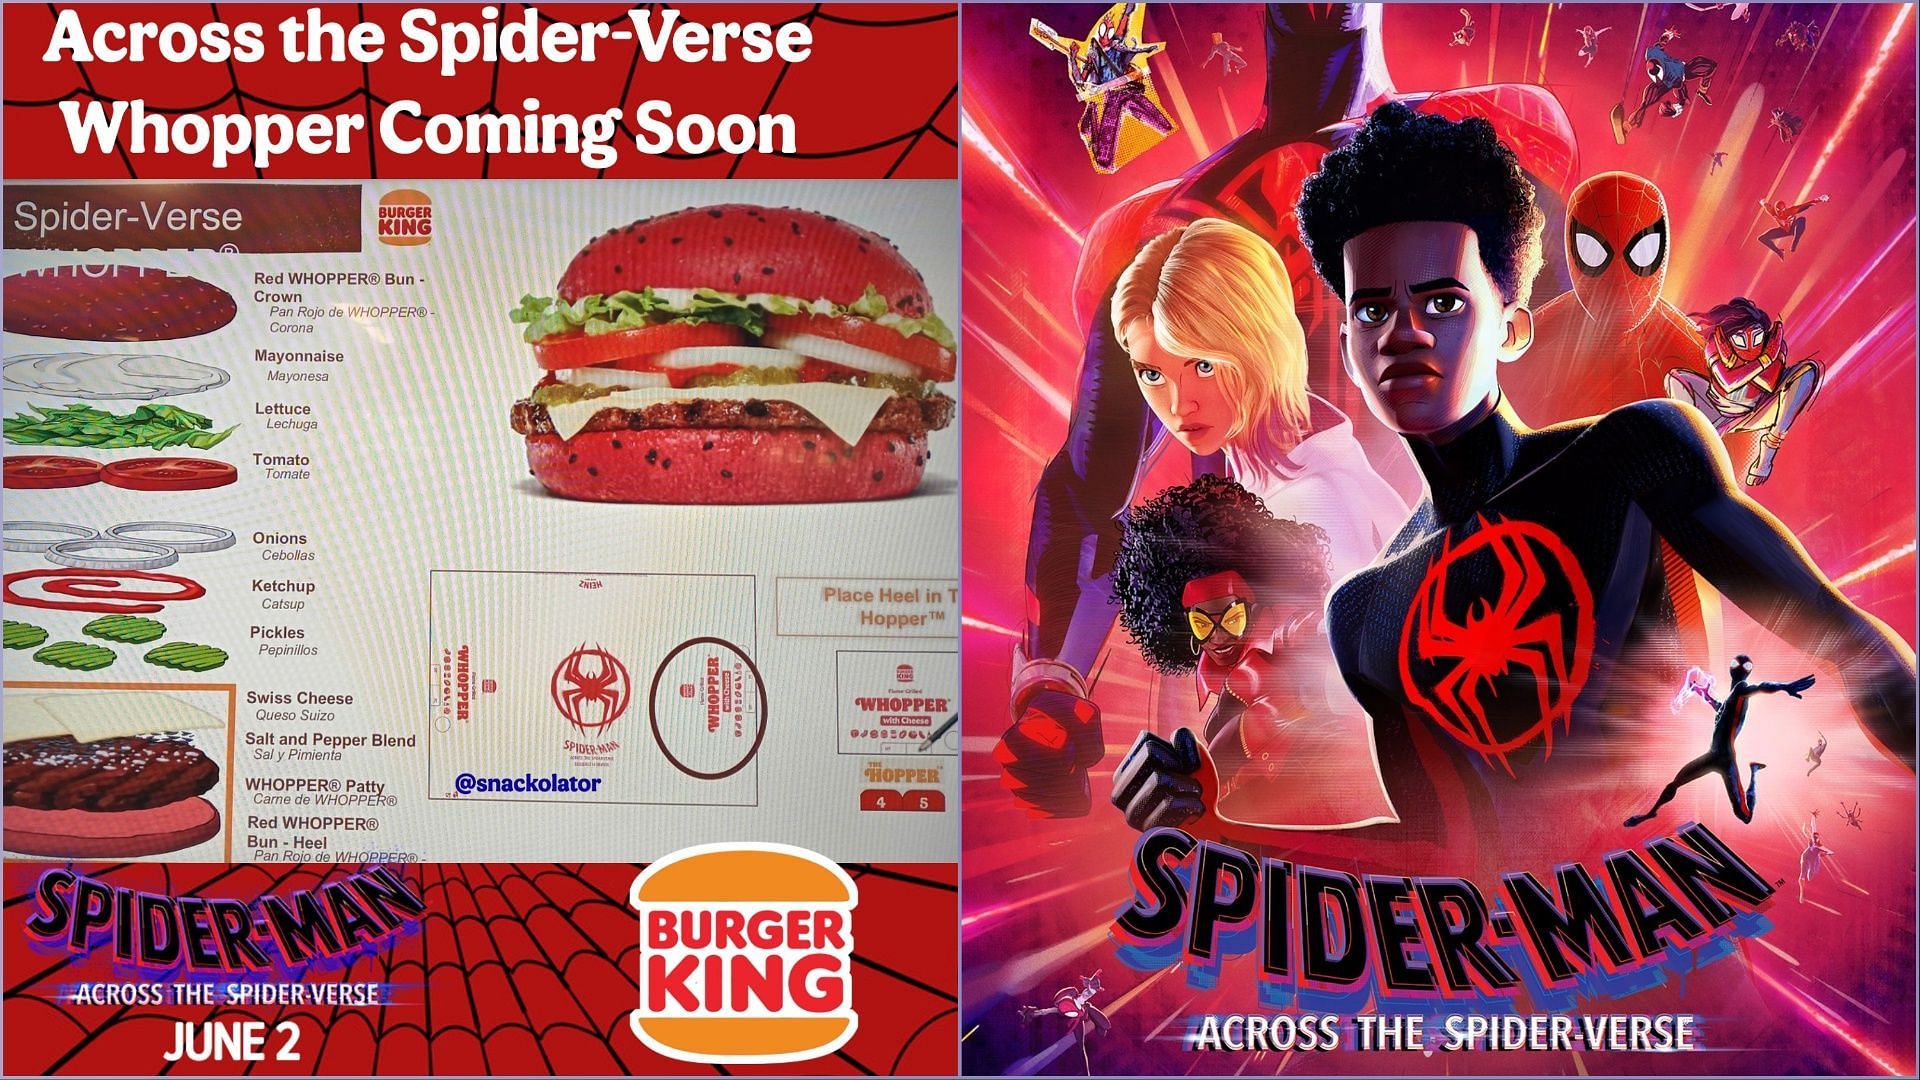 Gastro doctors are about to make a huge profit: Burger King's new  Spider-Verse-themed menu leaves internet divided